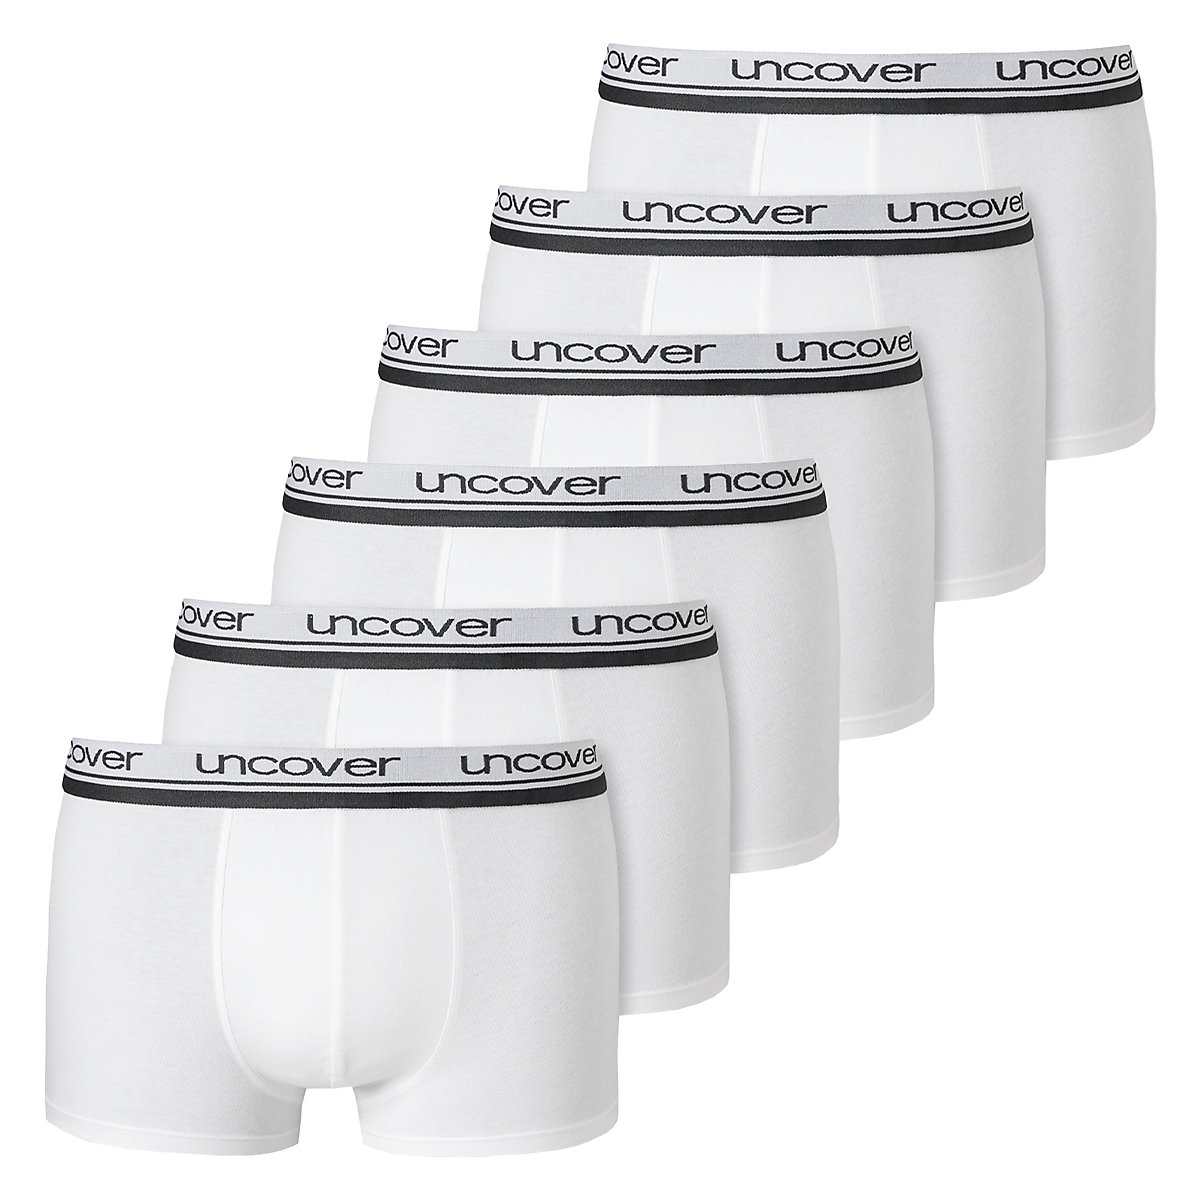 uncover by SCHIESSER Retro Shorts / Pant 6er Pack Basic Panties weiß